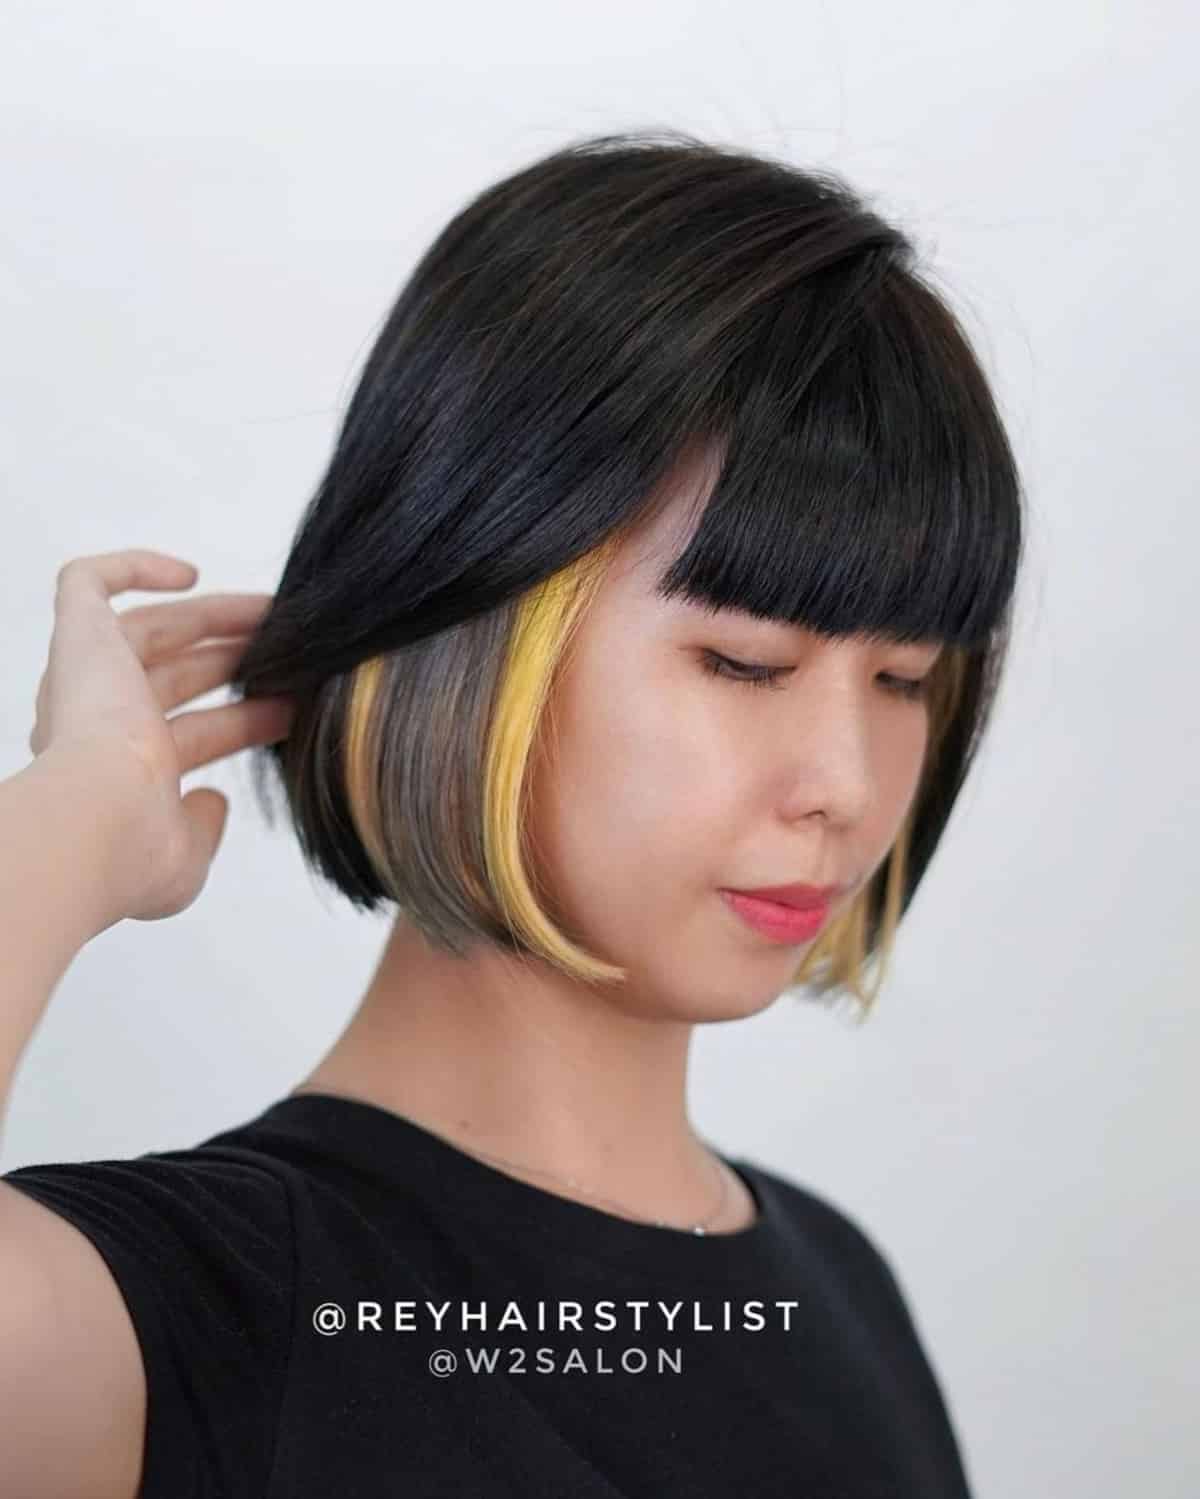 34 Absolutely Cute Haircuts &#038; Hairstyles to Ogle Right Now